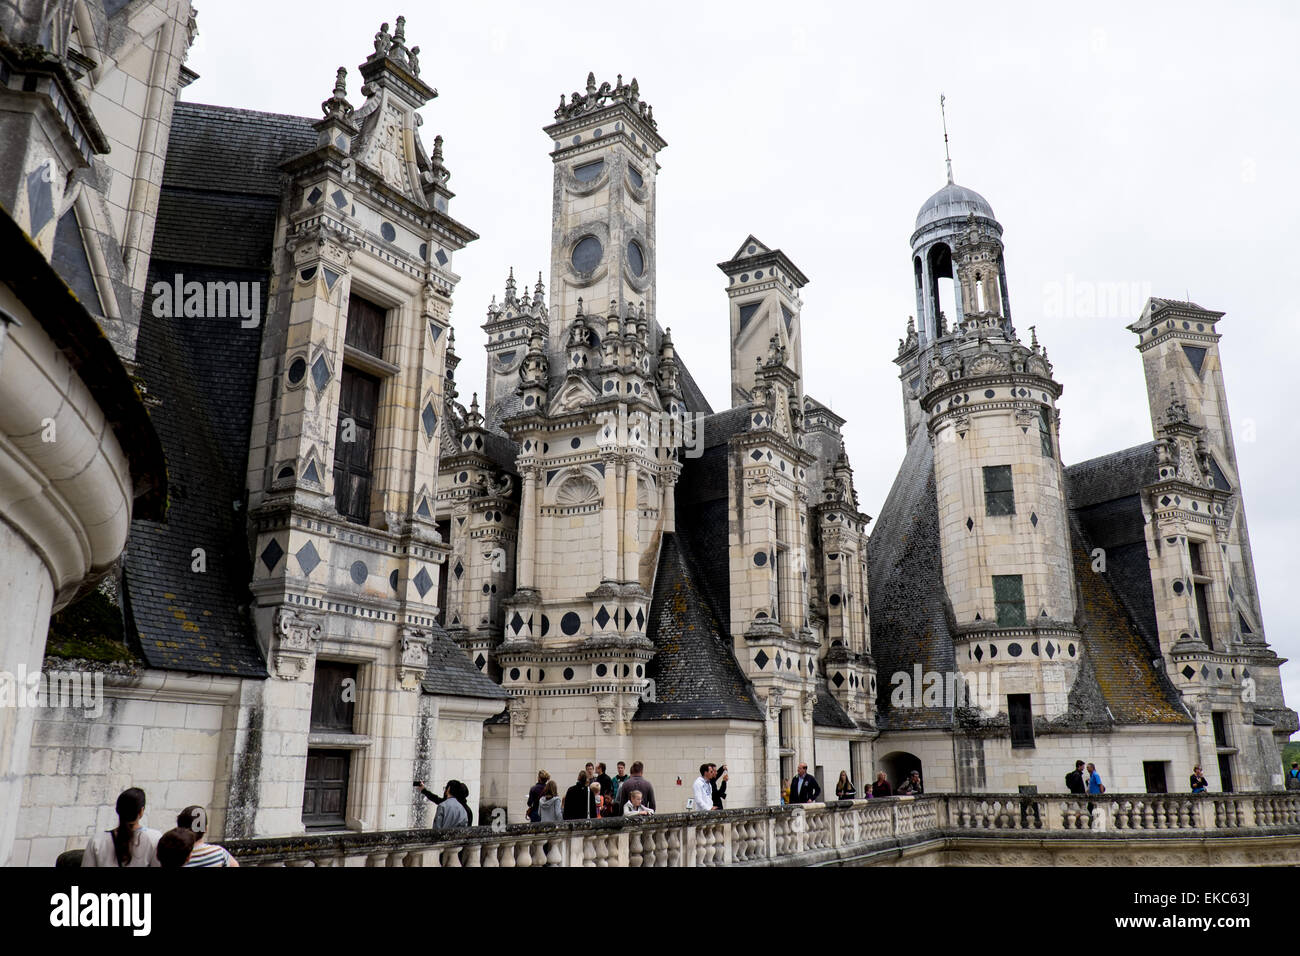 Towers of Chateau de Chambord, Loire Valley, France Stock Photo